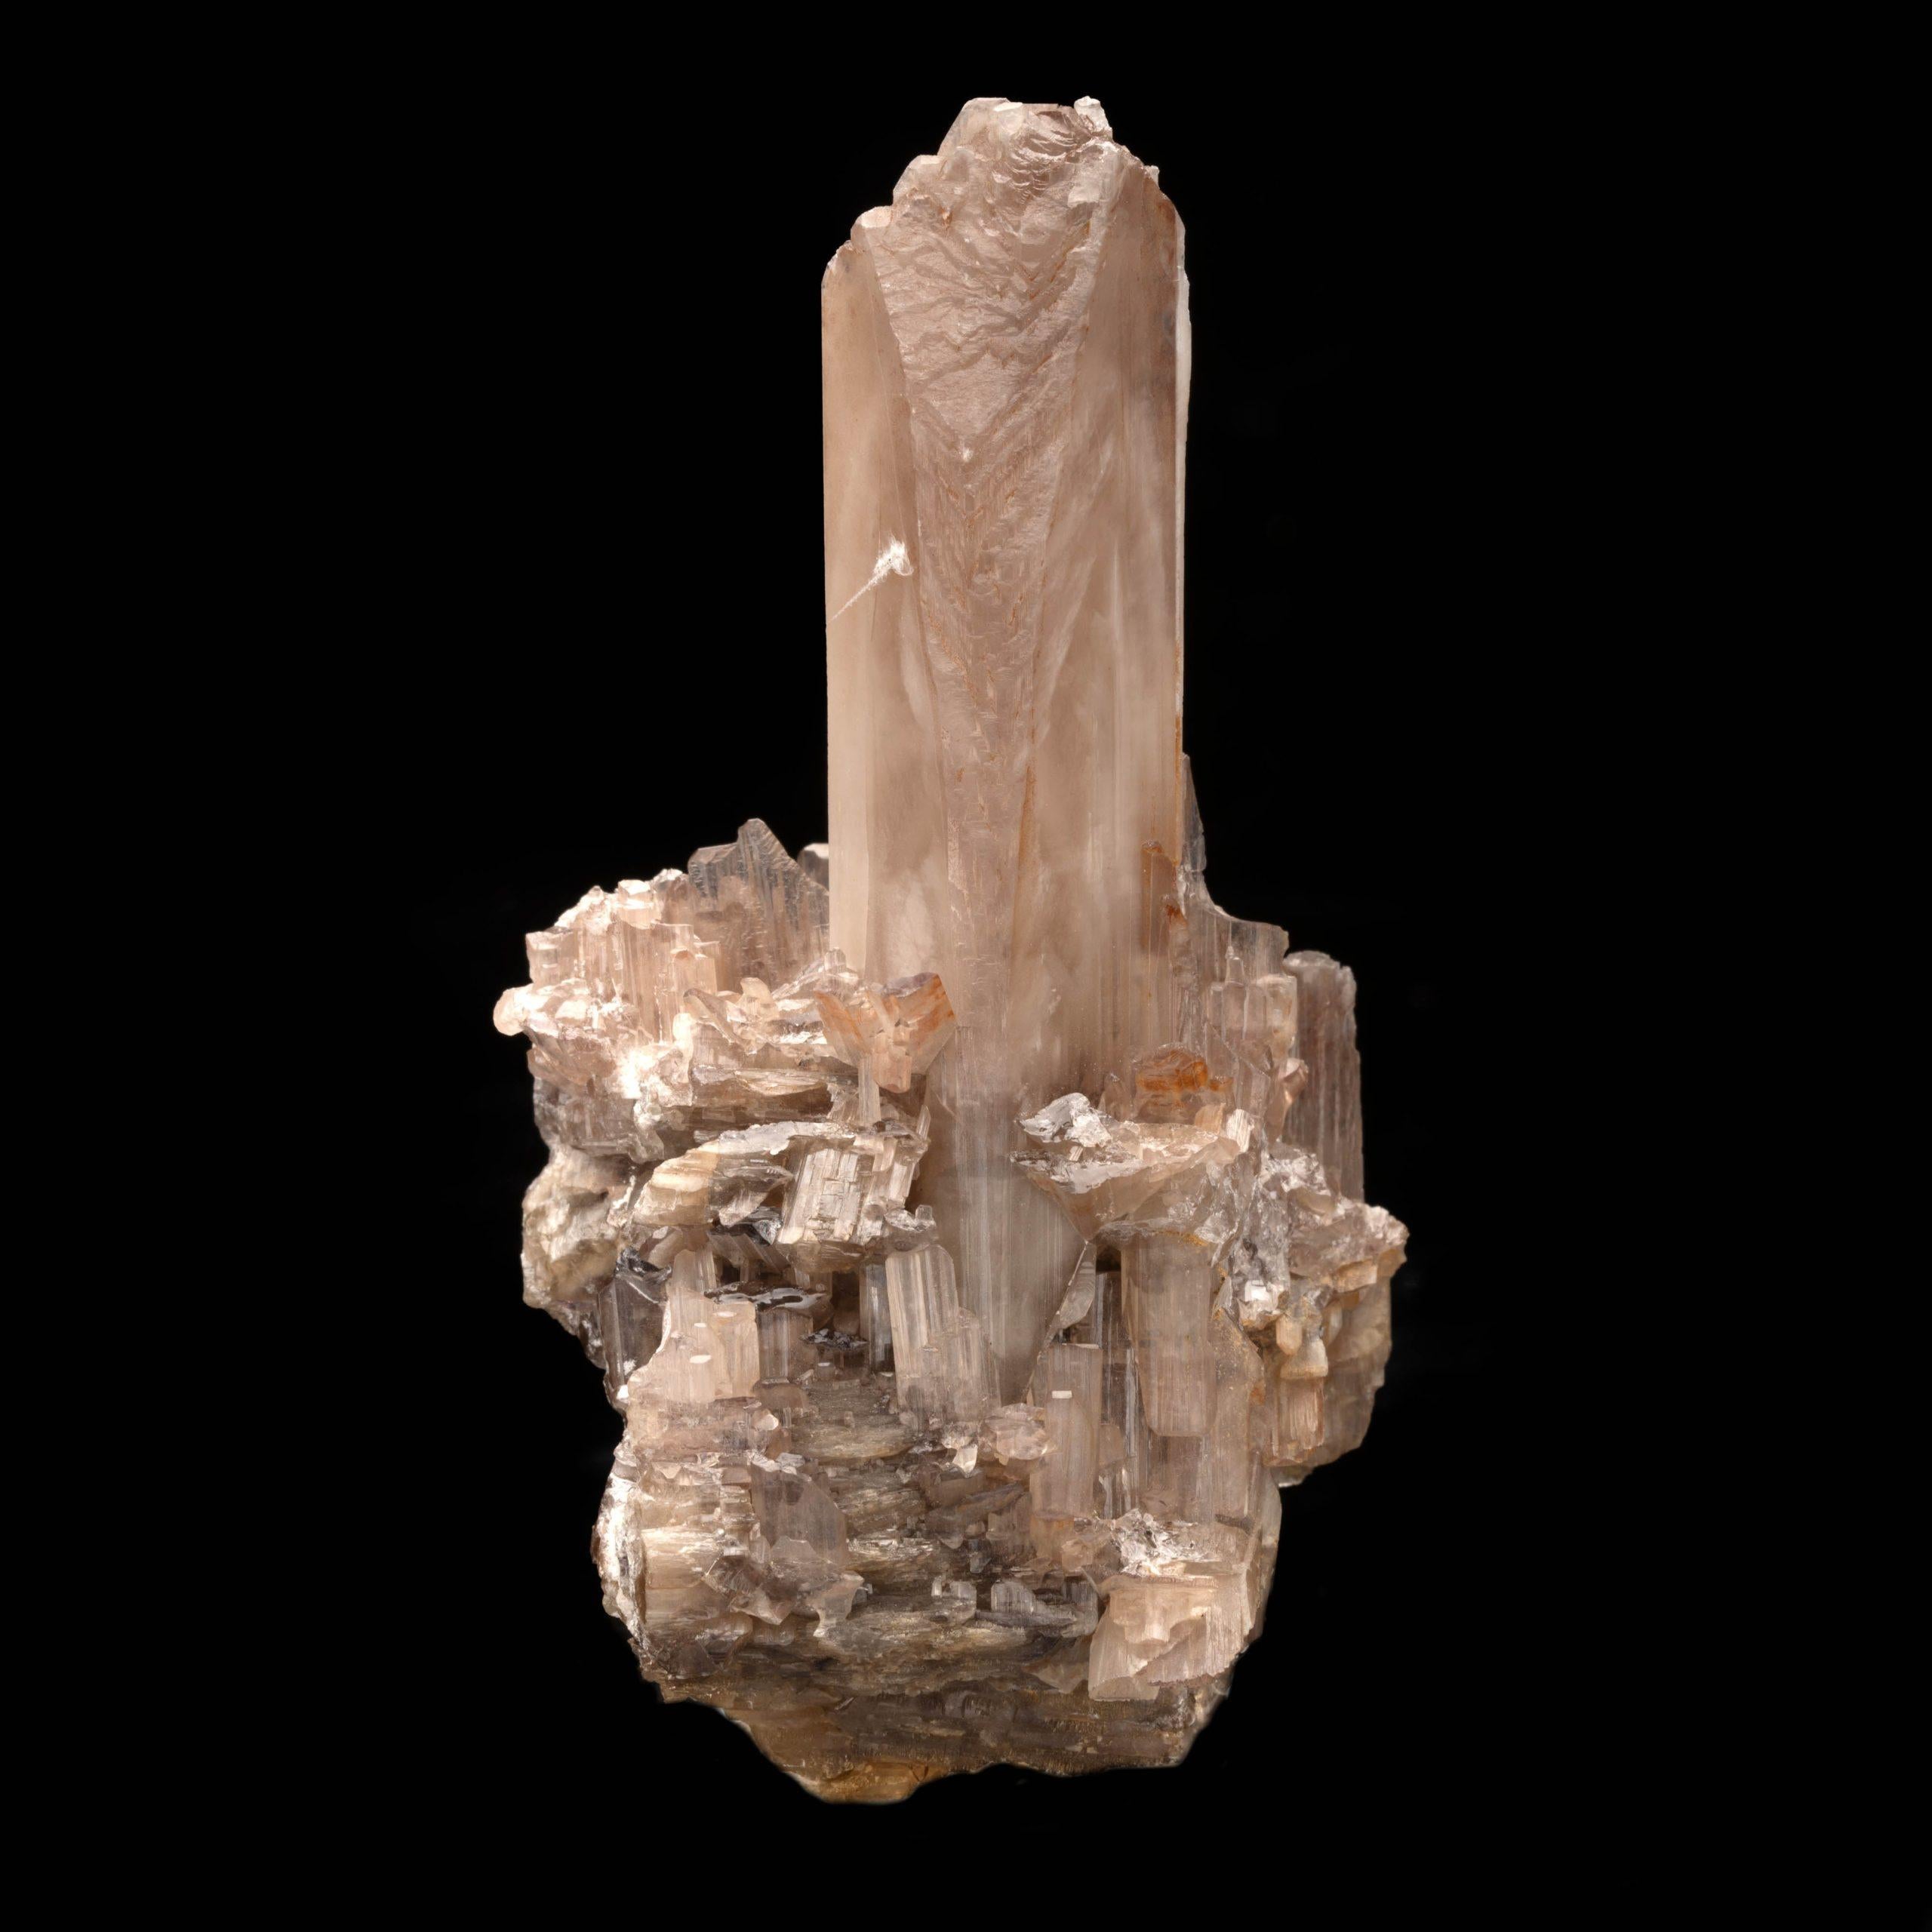 Tsumeb Mine, Namibia

Gem-quality cerrusite from this location is hard to come by and prized by collectors. Some of the best cerrusite in the world comes out of Namibia and this fine specimen is no exception. A gorgeous almost peach hue, this large